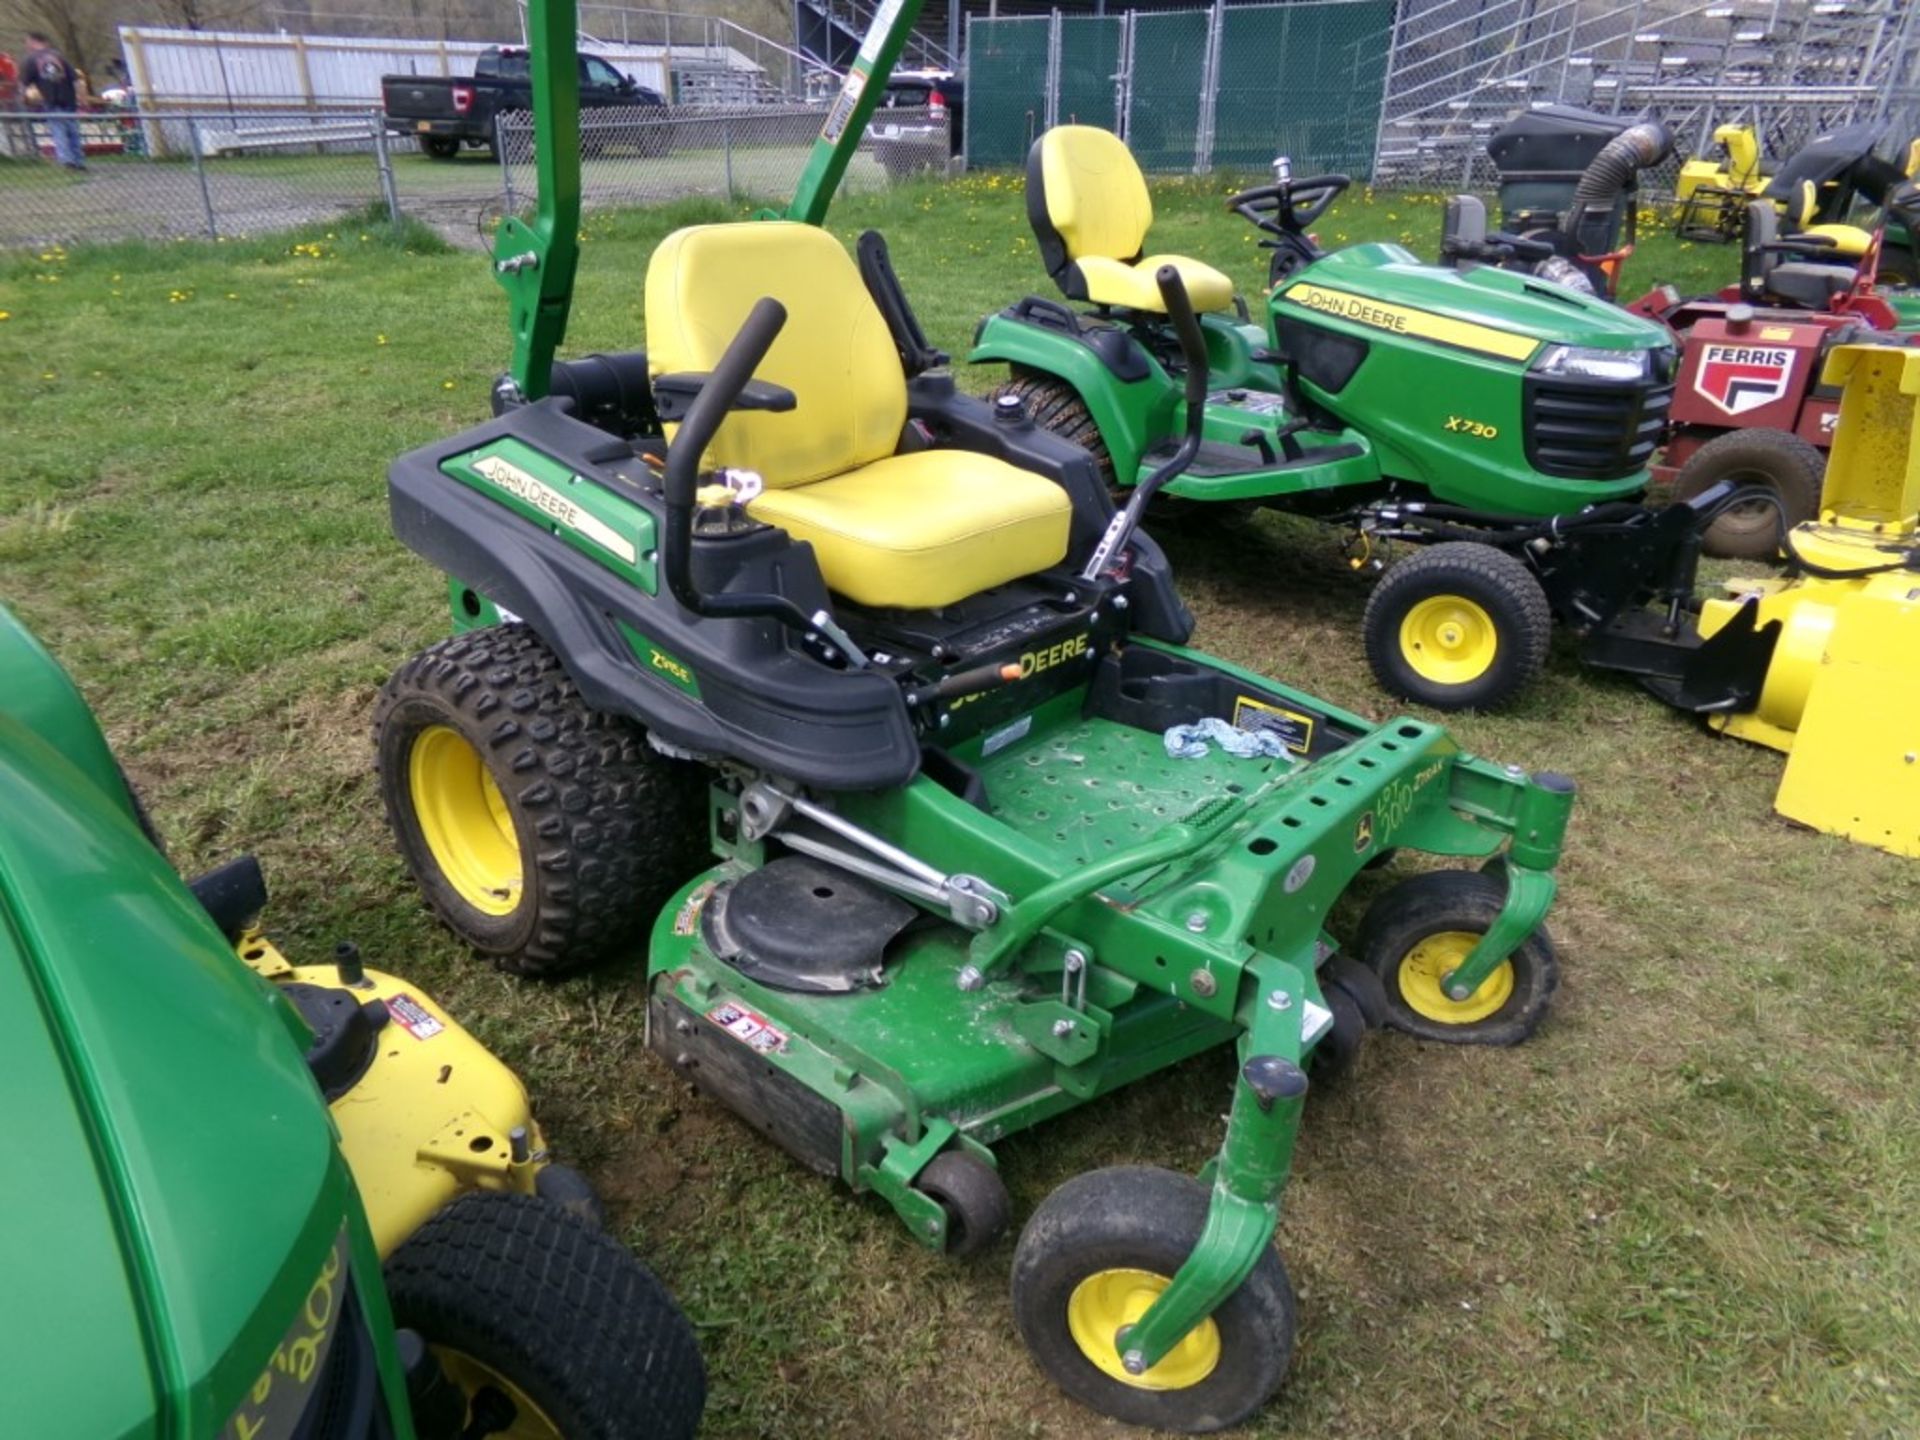 John Deere Z915E Commercial Zero Turn Mower with 54'' 7 Iron Deck, ROPS, 25 HP, 731 Hrs.(5128) - Image 2 of 3